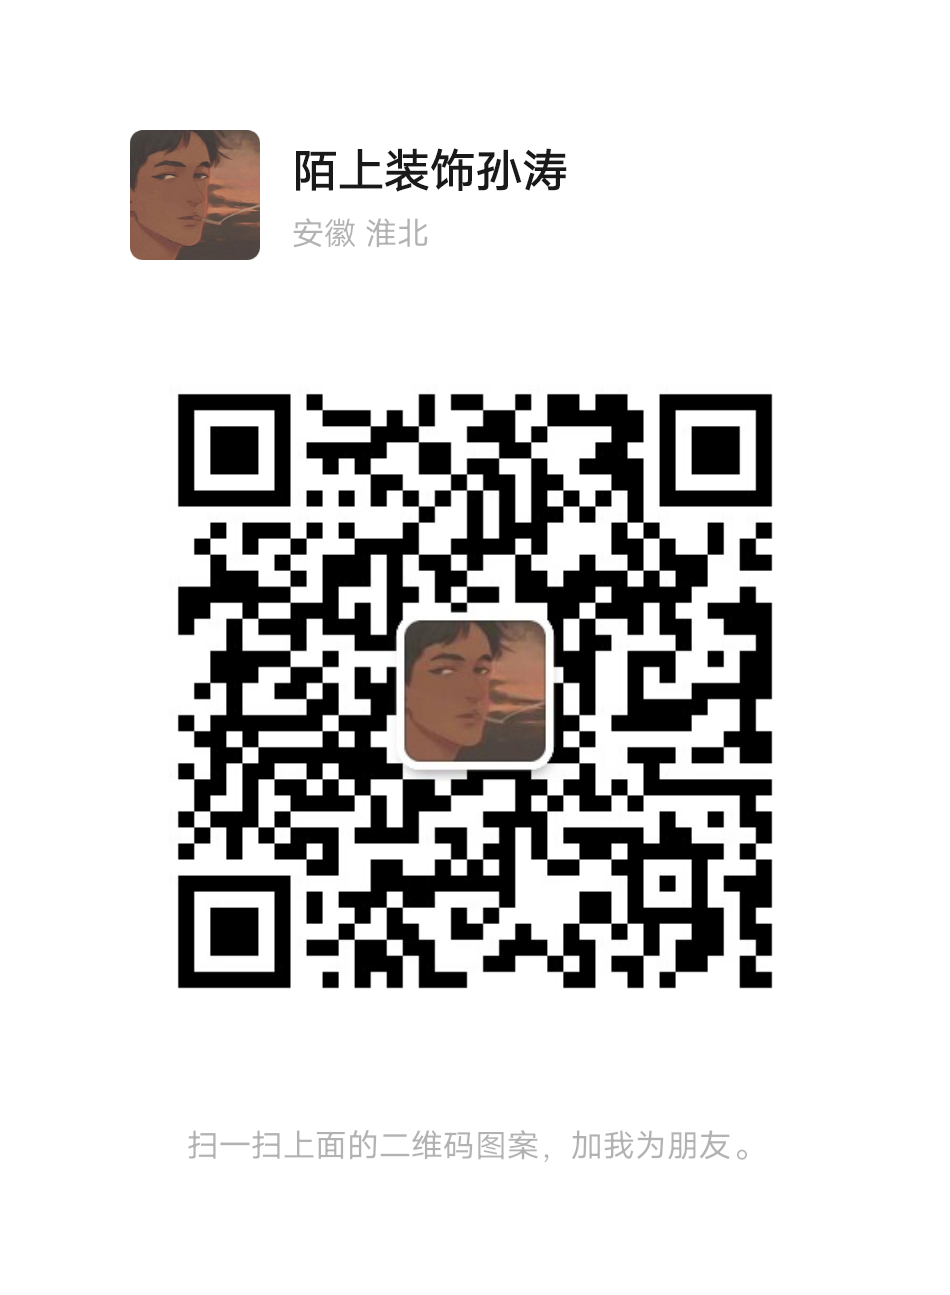 mmqrcode1667614382982.png